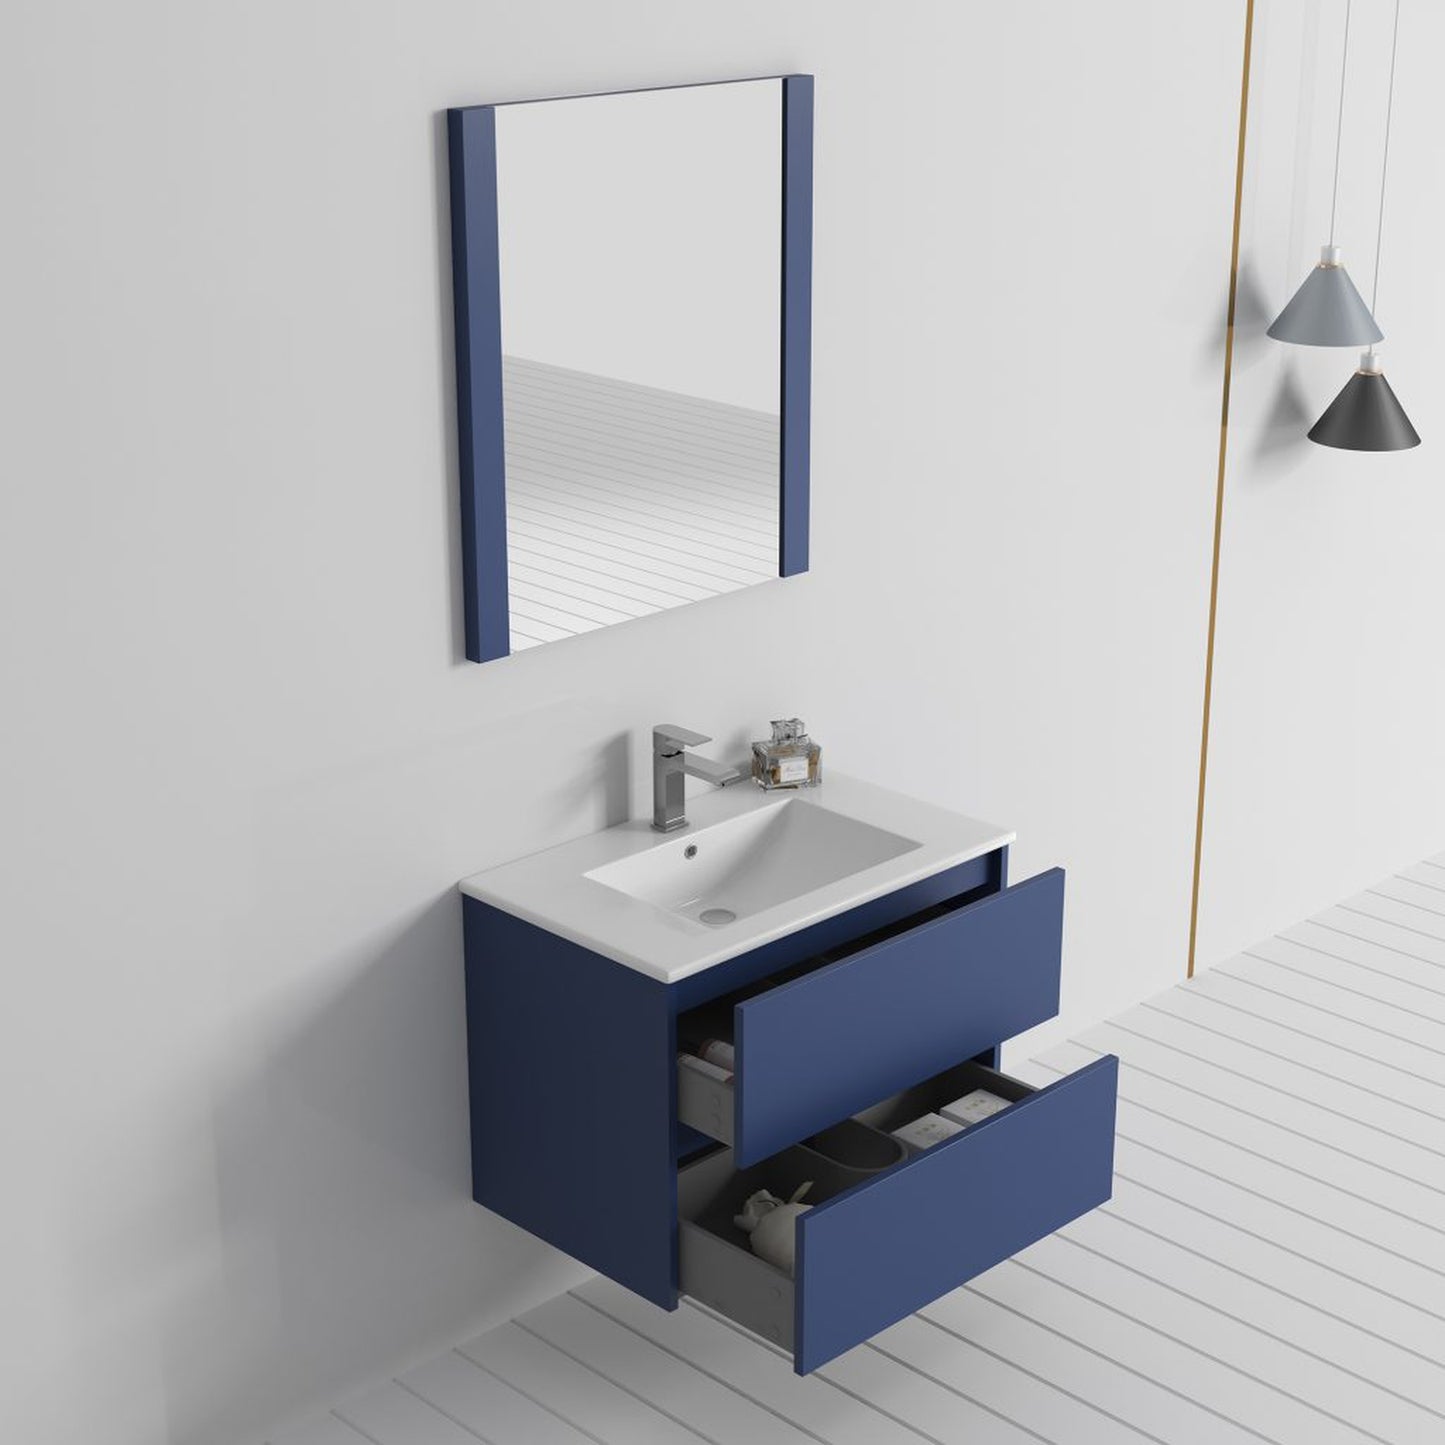 Blossom Valencia 30" Navy Blue Wall-Mounted Vanity Base Only